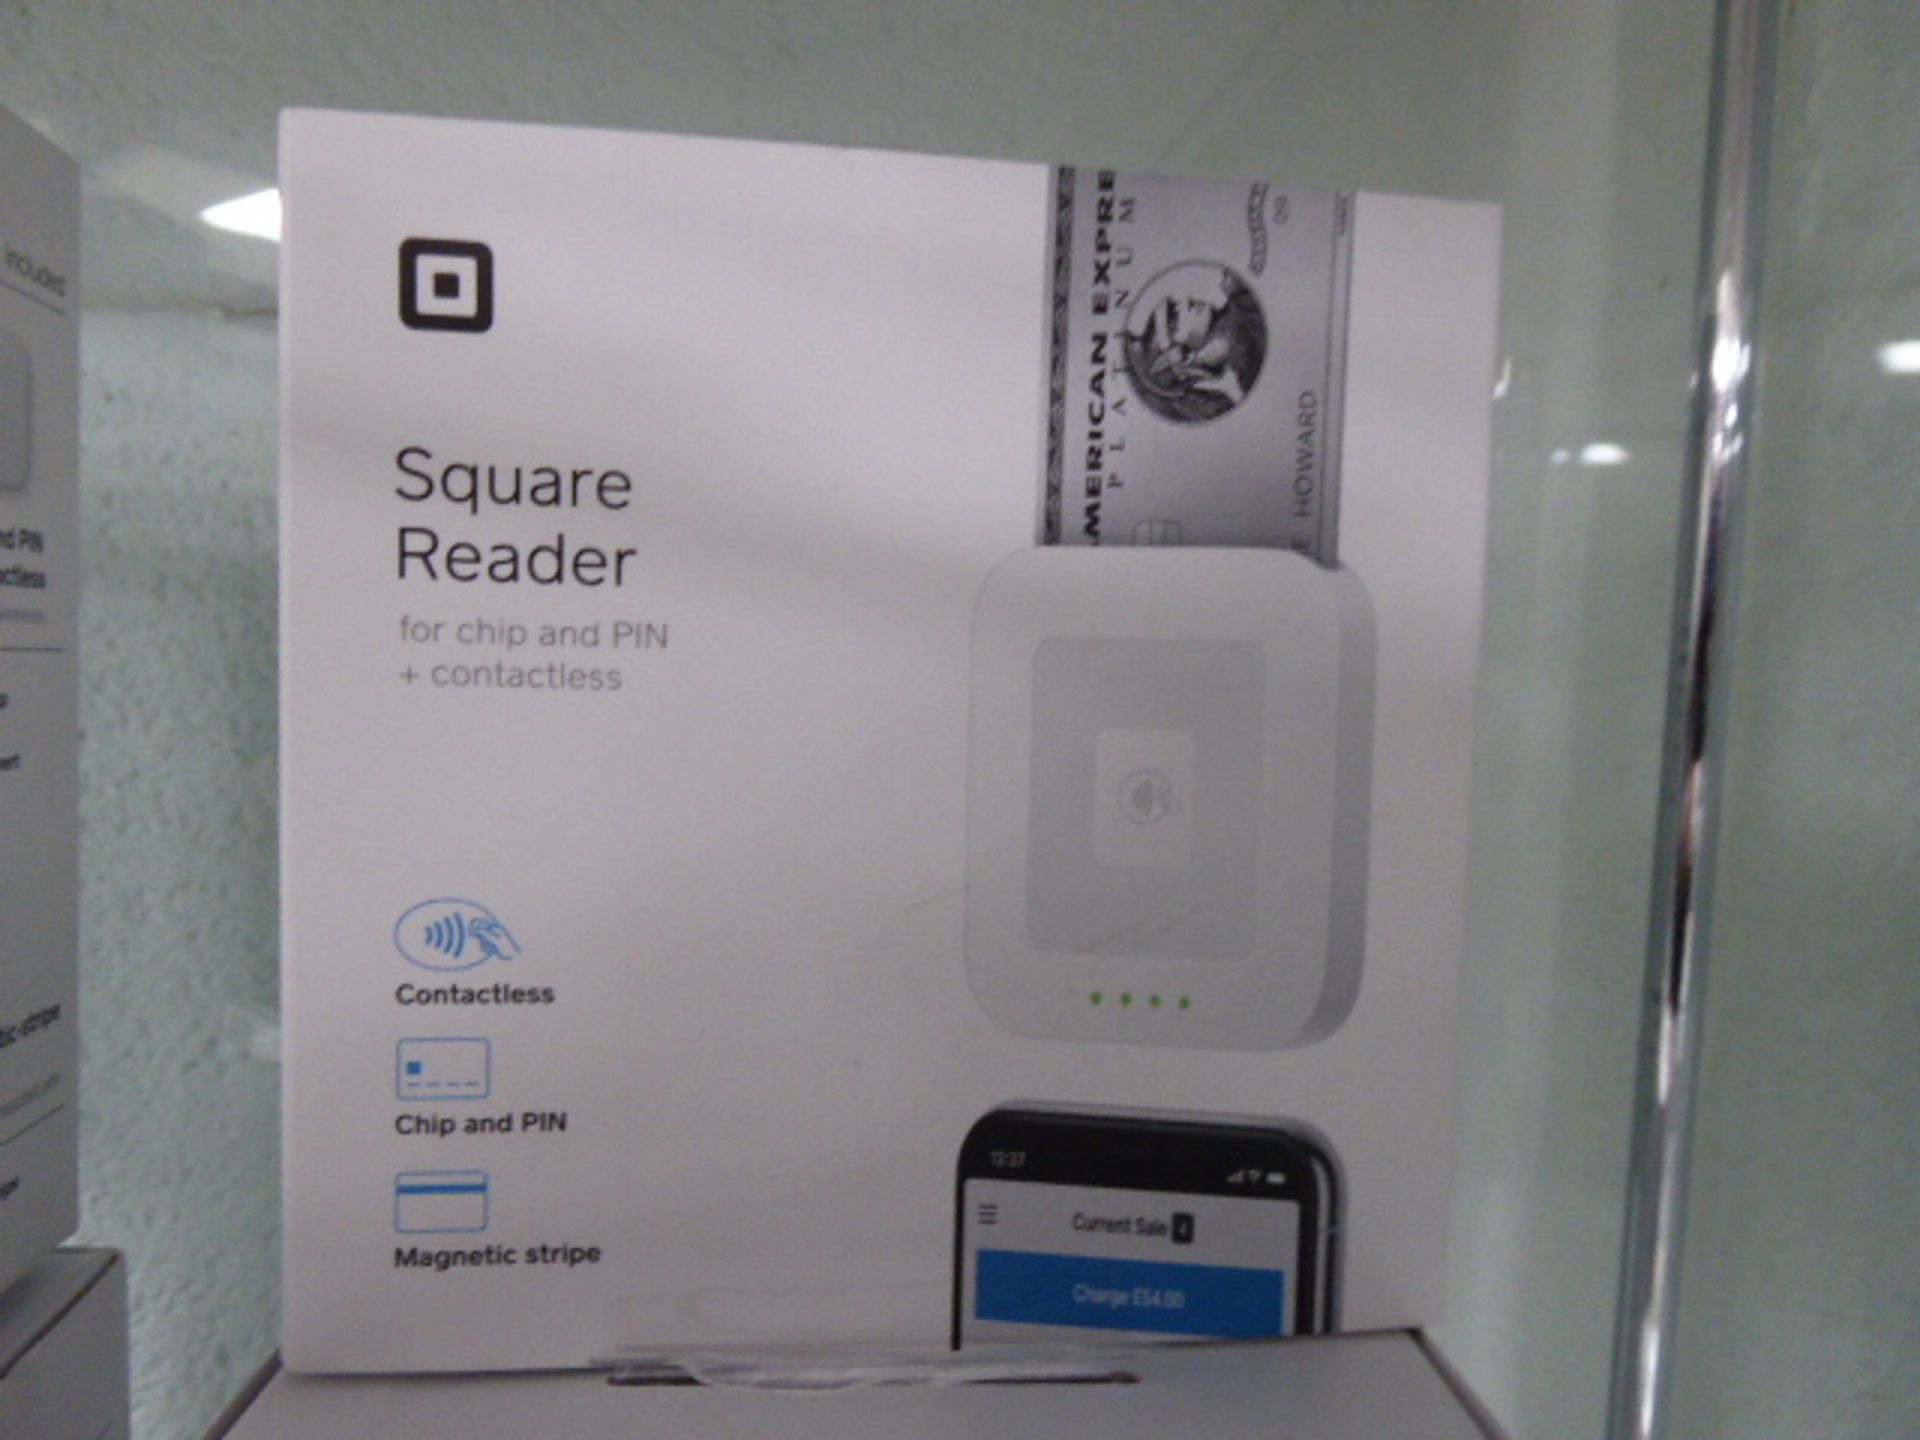 Square chip and pin contactless card reader and a dock for square reader